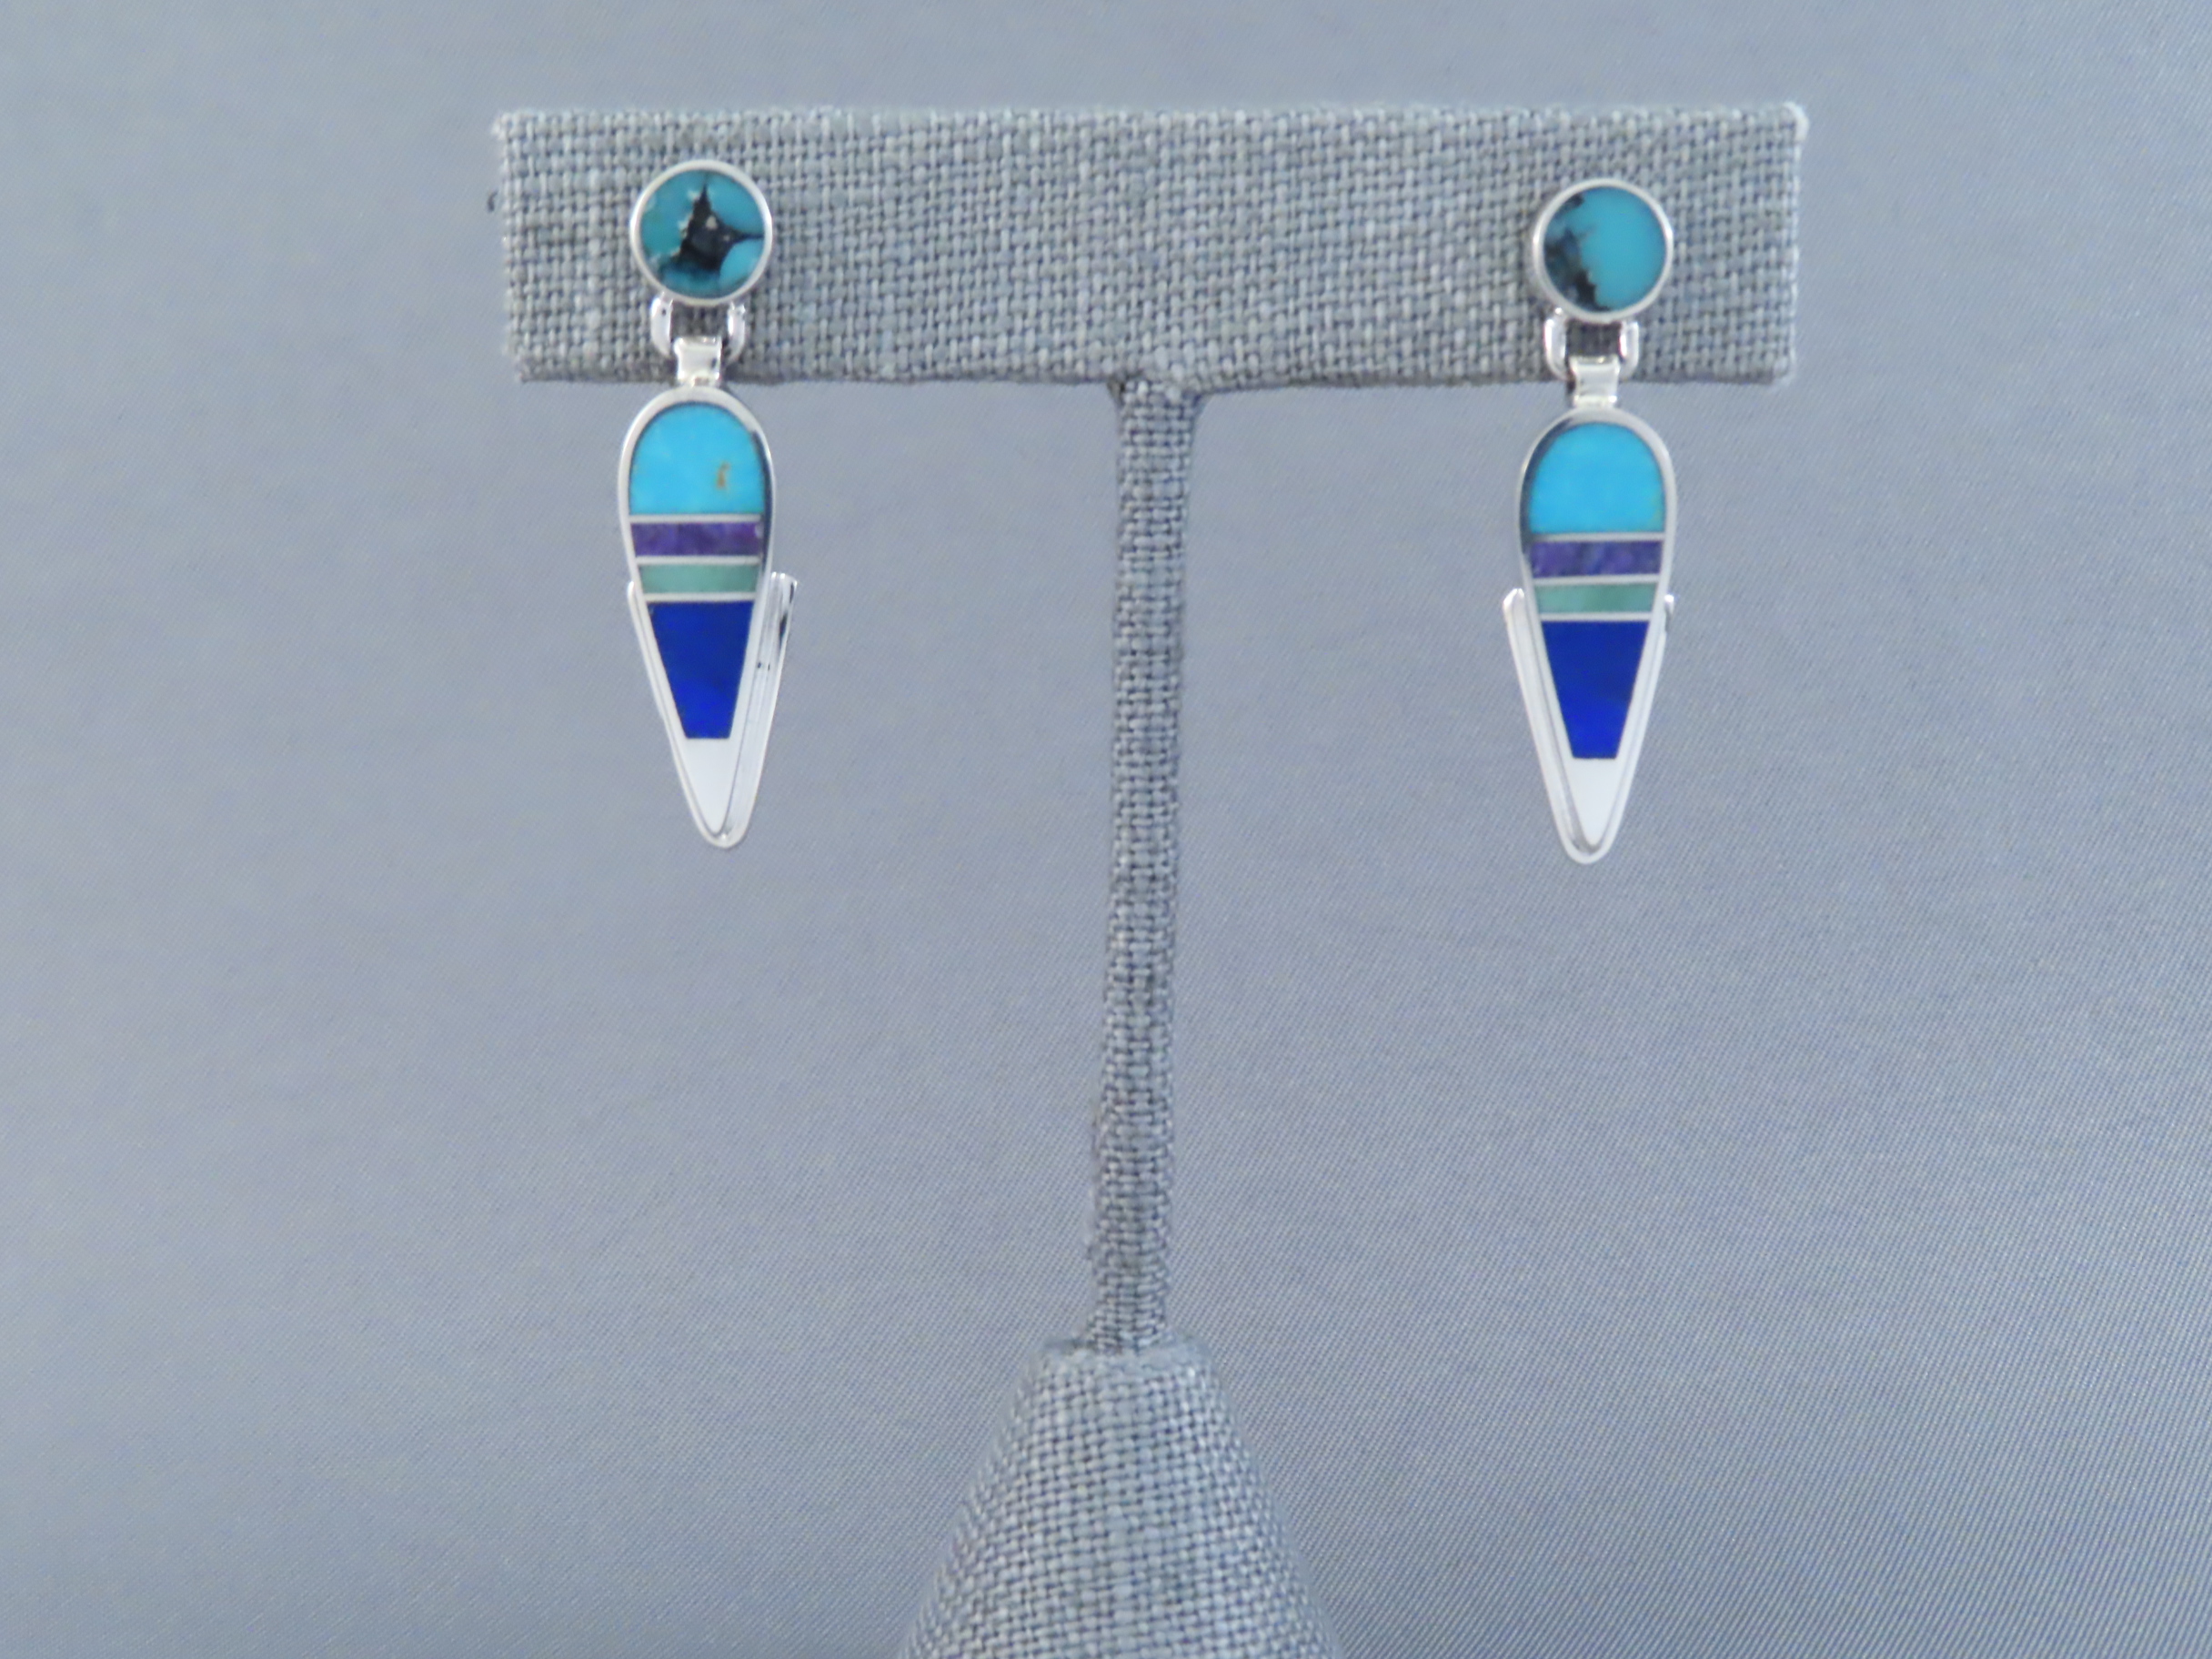 Buy Inlay Jewelry - Inlaid Multi-Stone Earrings (Dangling Posts) by Native American Jeweler, Delphine Benally $198- FOR SALE